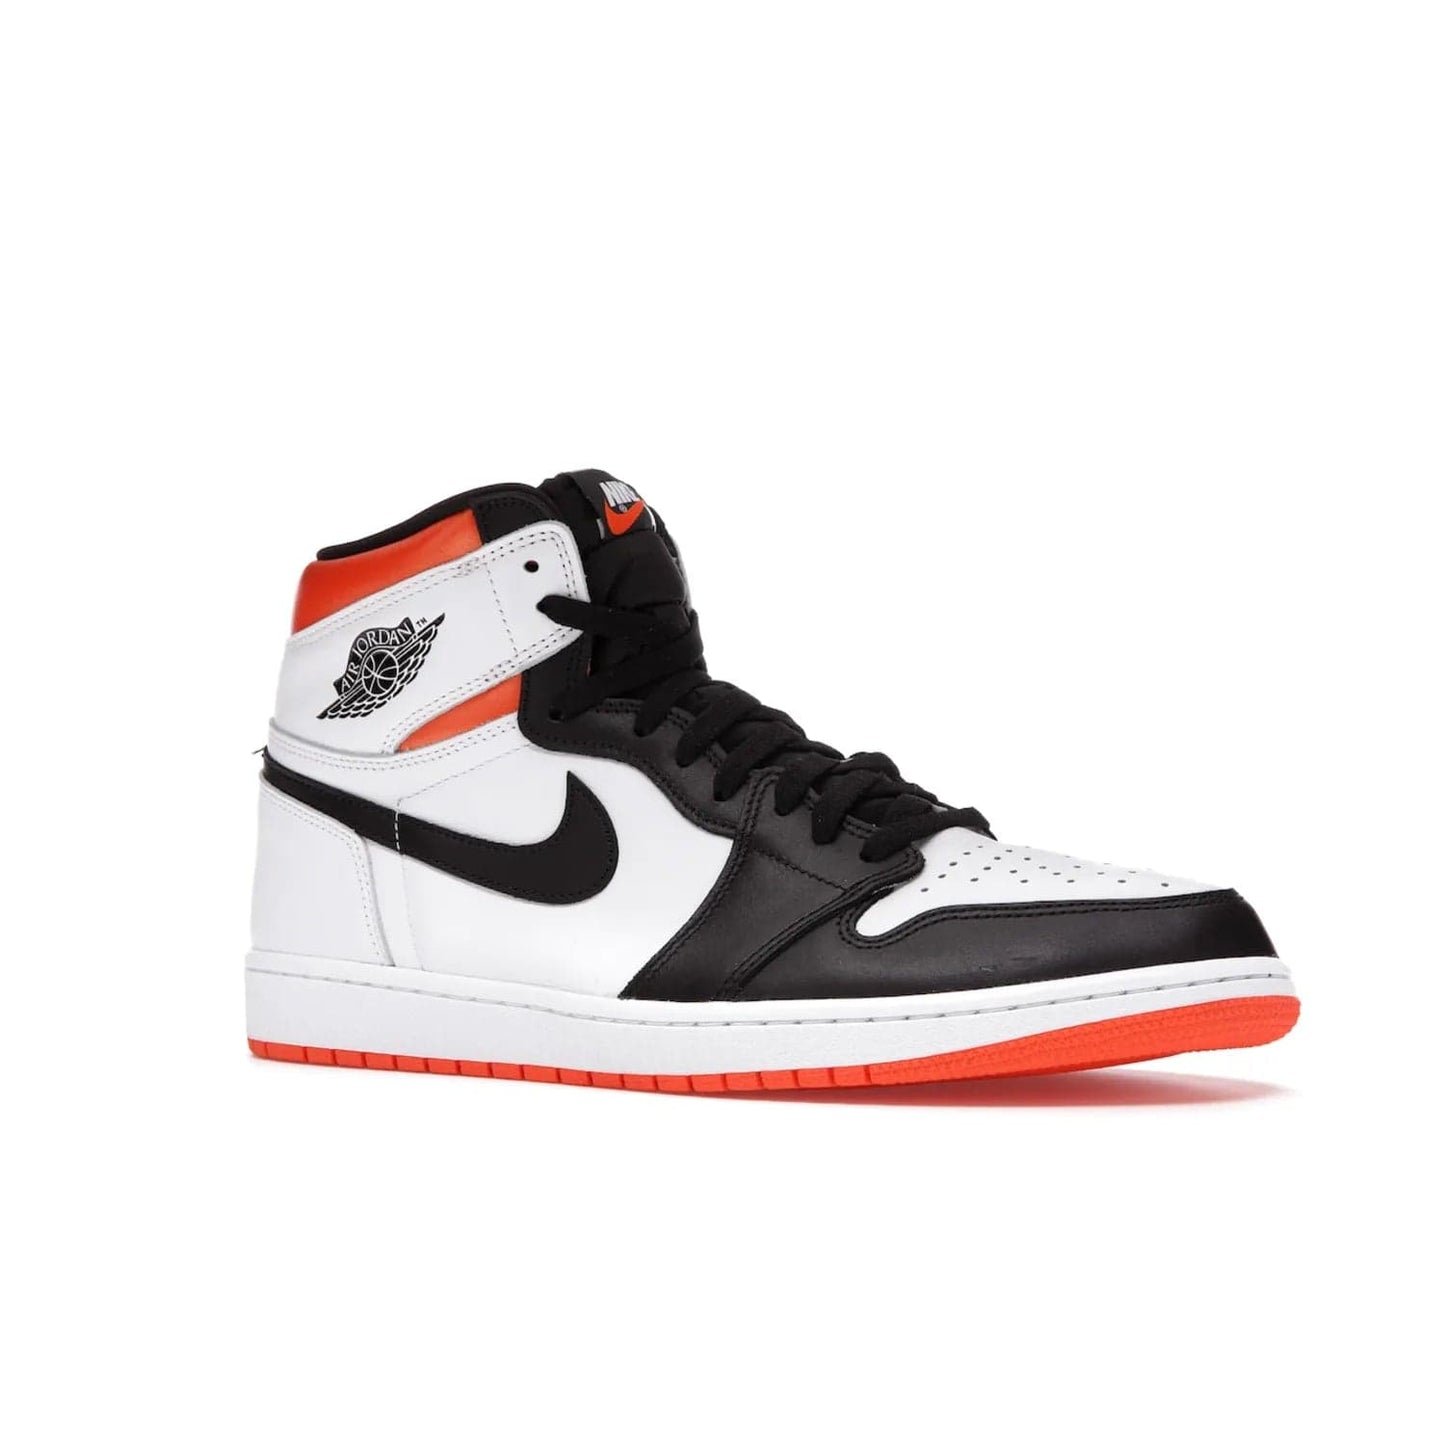 Jordan 1 Retro High Electro Orange - Image 4 - Only at www.BallersClubKickz.com - This Air Jordan 1 Retro High Electro Orange features a white leather upper with black overlays and vibrant Hyper Orange ankle wrap. Turn heads with this iconic design of woven tongue label and sole. Get yours today and add some serious style to your rotation.